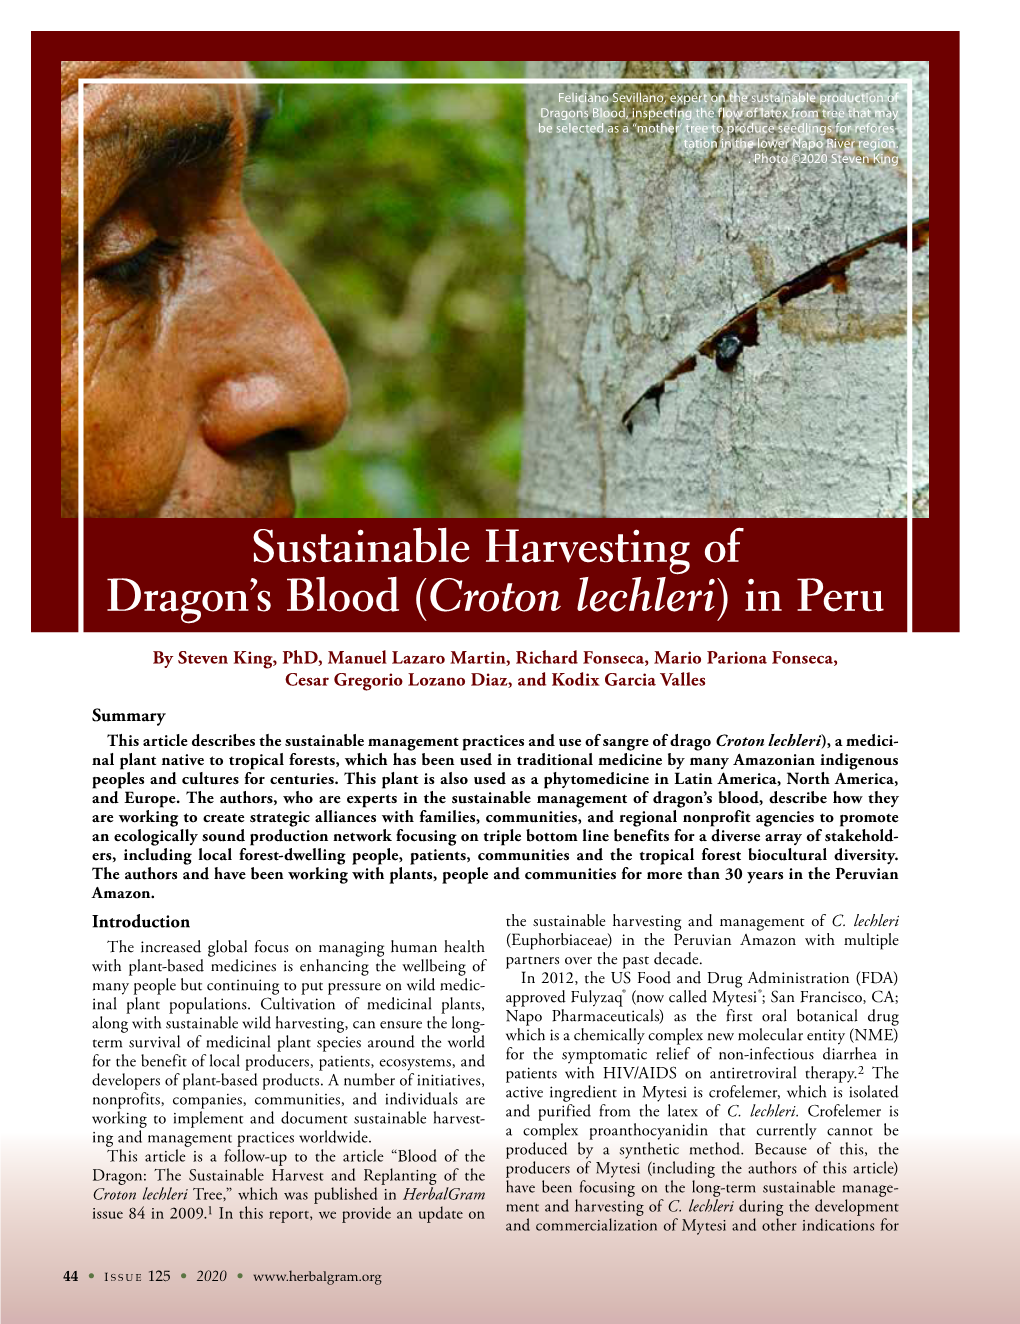 Sustainable Harvesting of Dragon's Blood (Croton Lechleri) in Peru